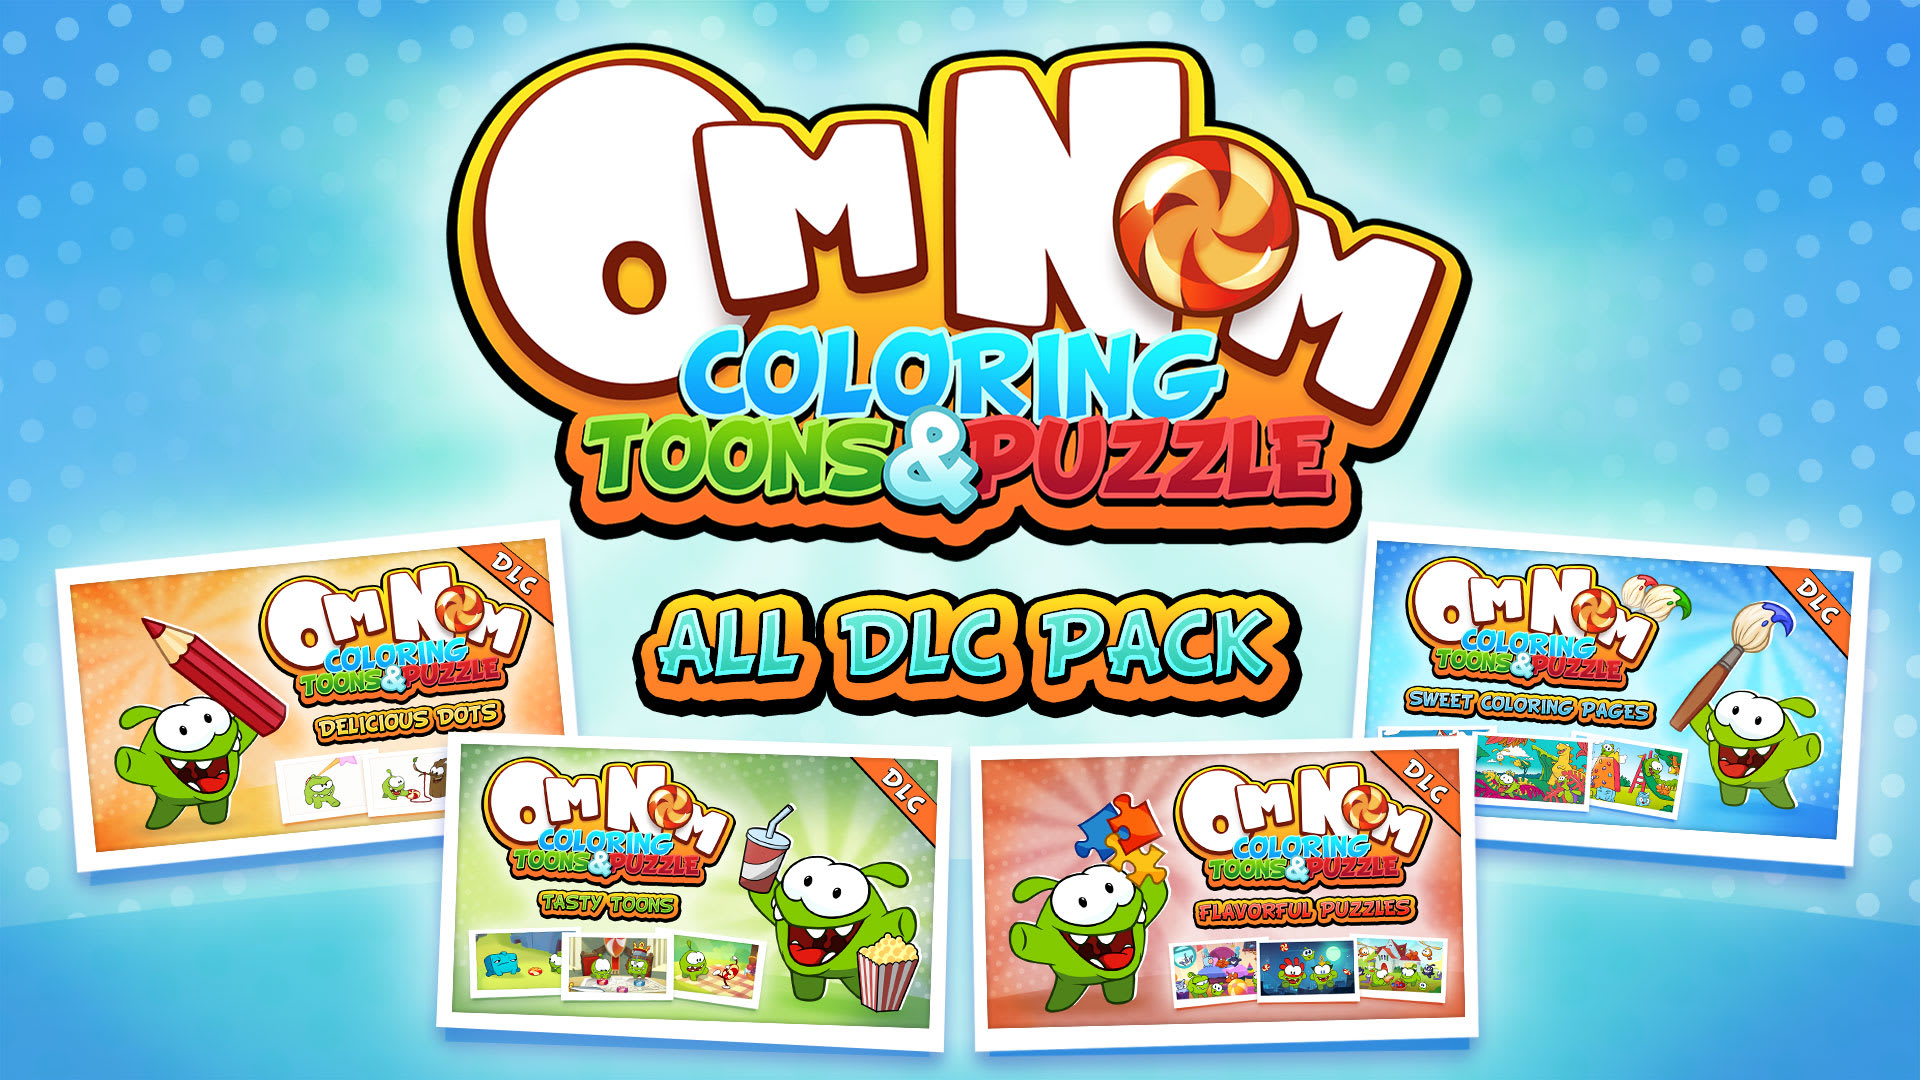 Om Nom: Coloring, Toons & Puzzle - All DLC Pack